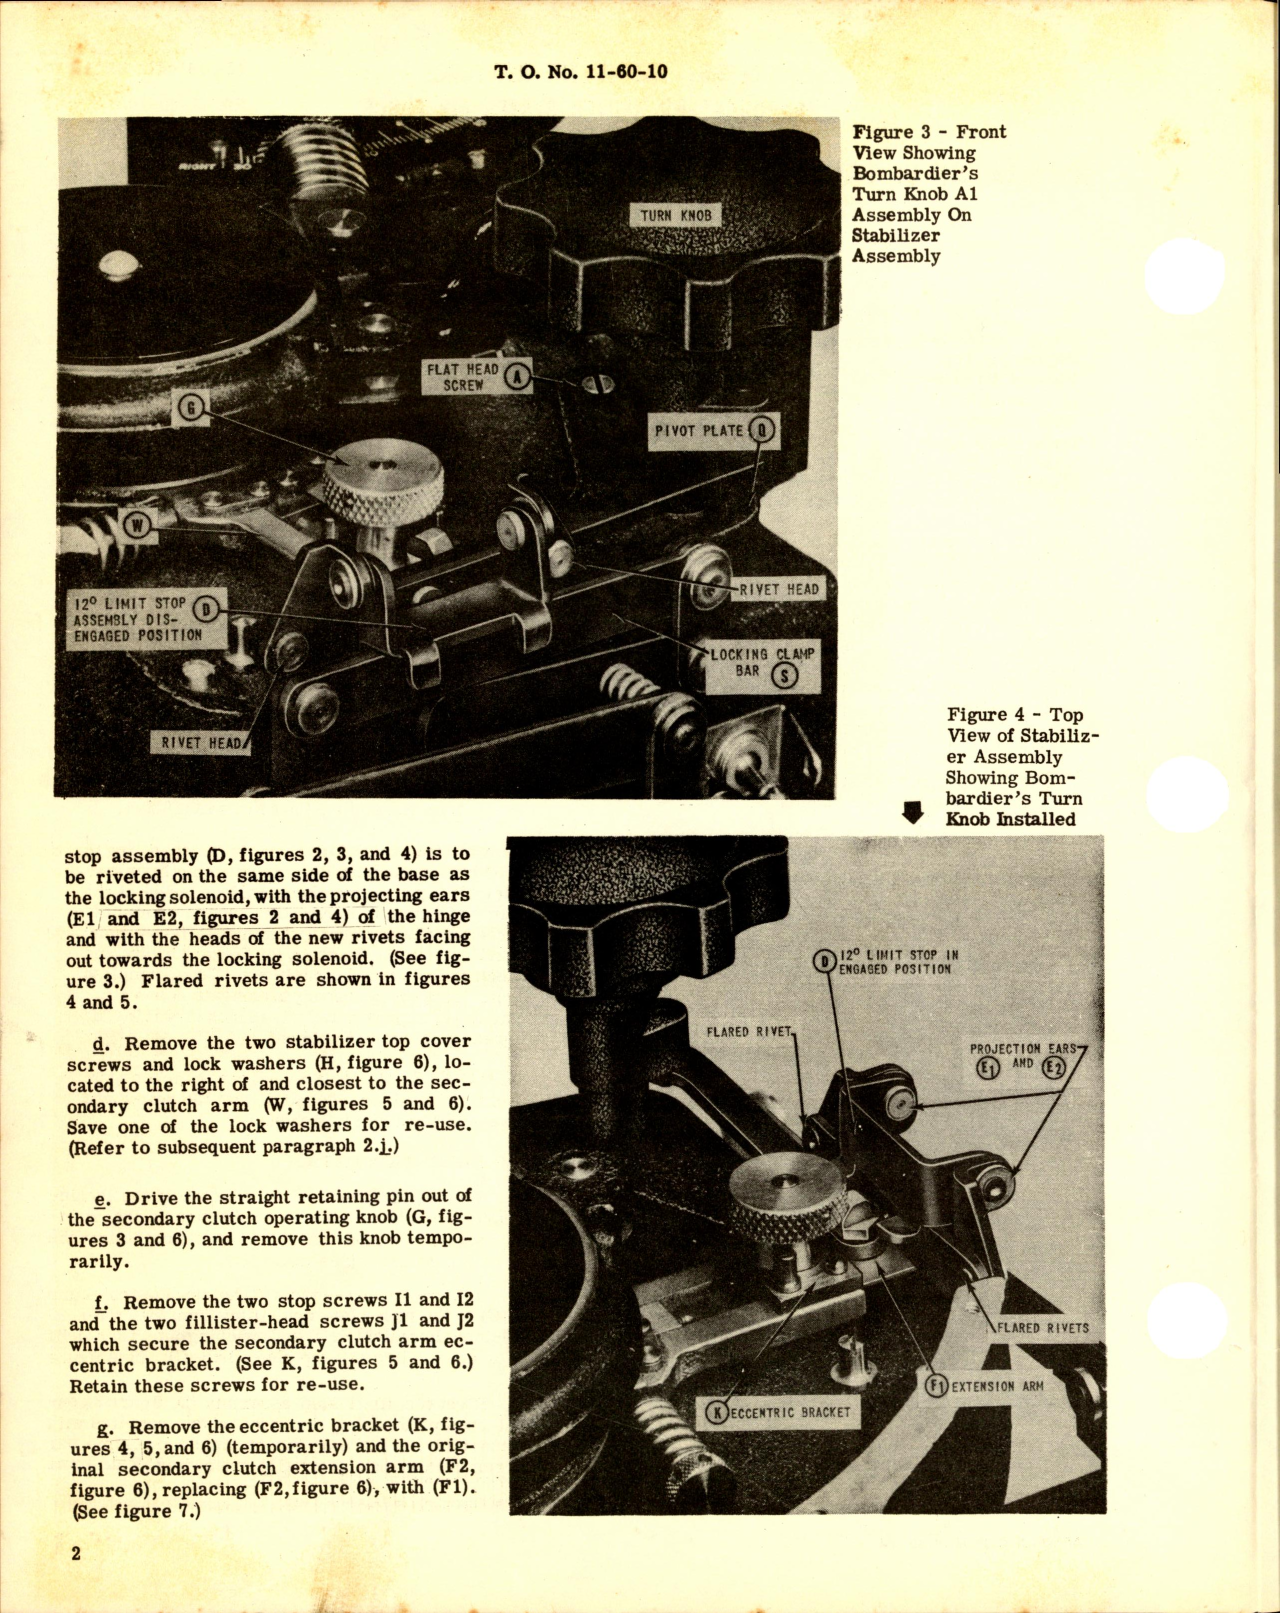 Sample page 2 from AirCorps Library document: Installation of Bombardier's Turn Knob Assembly